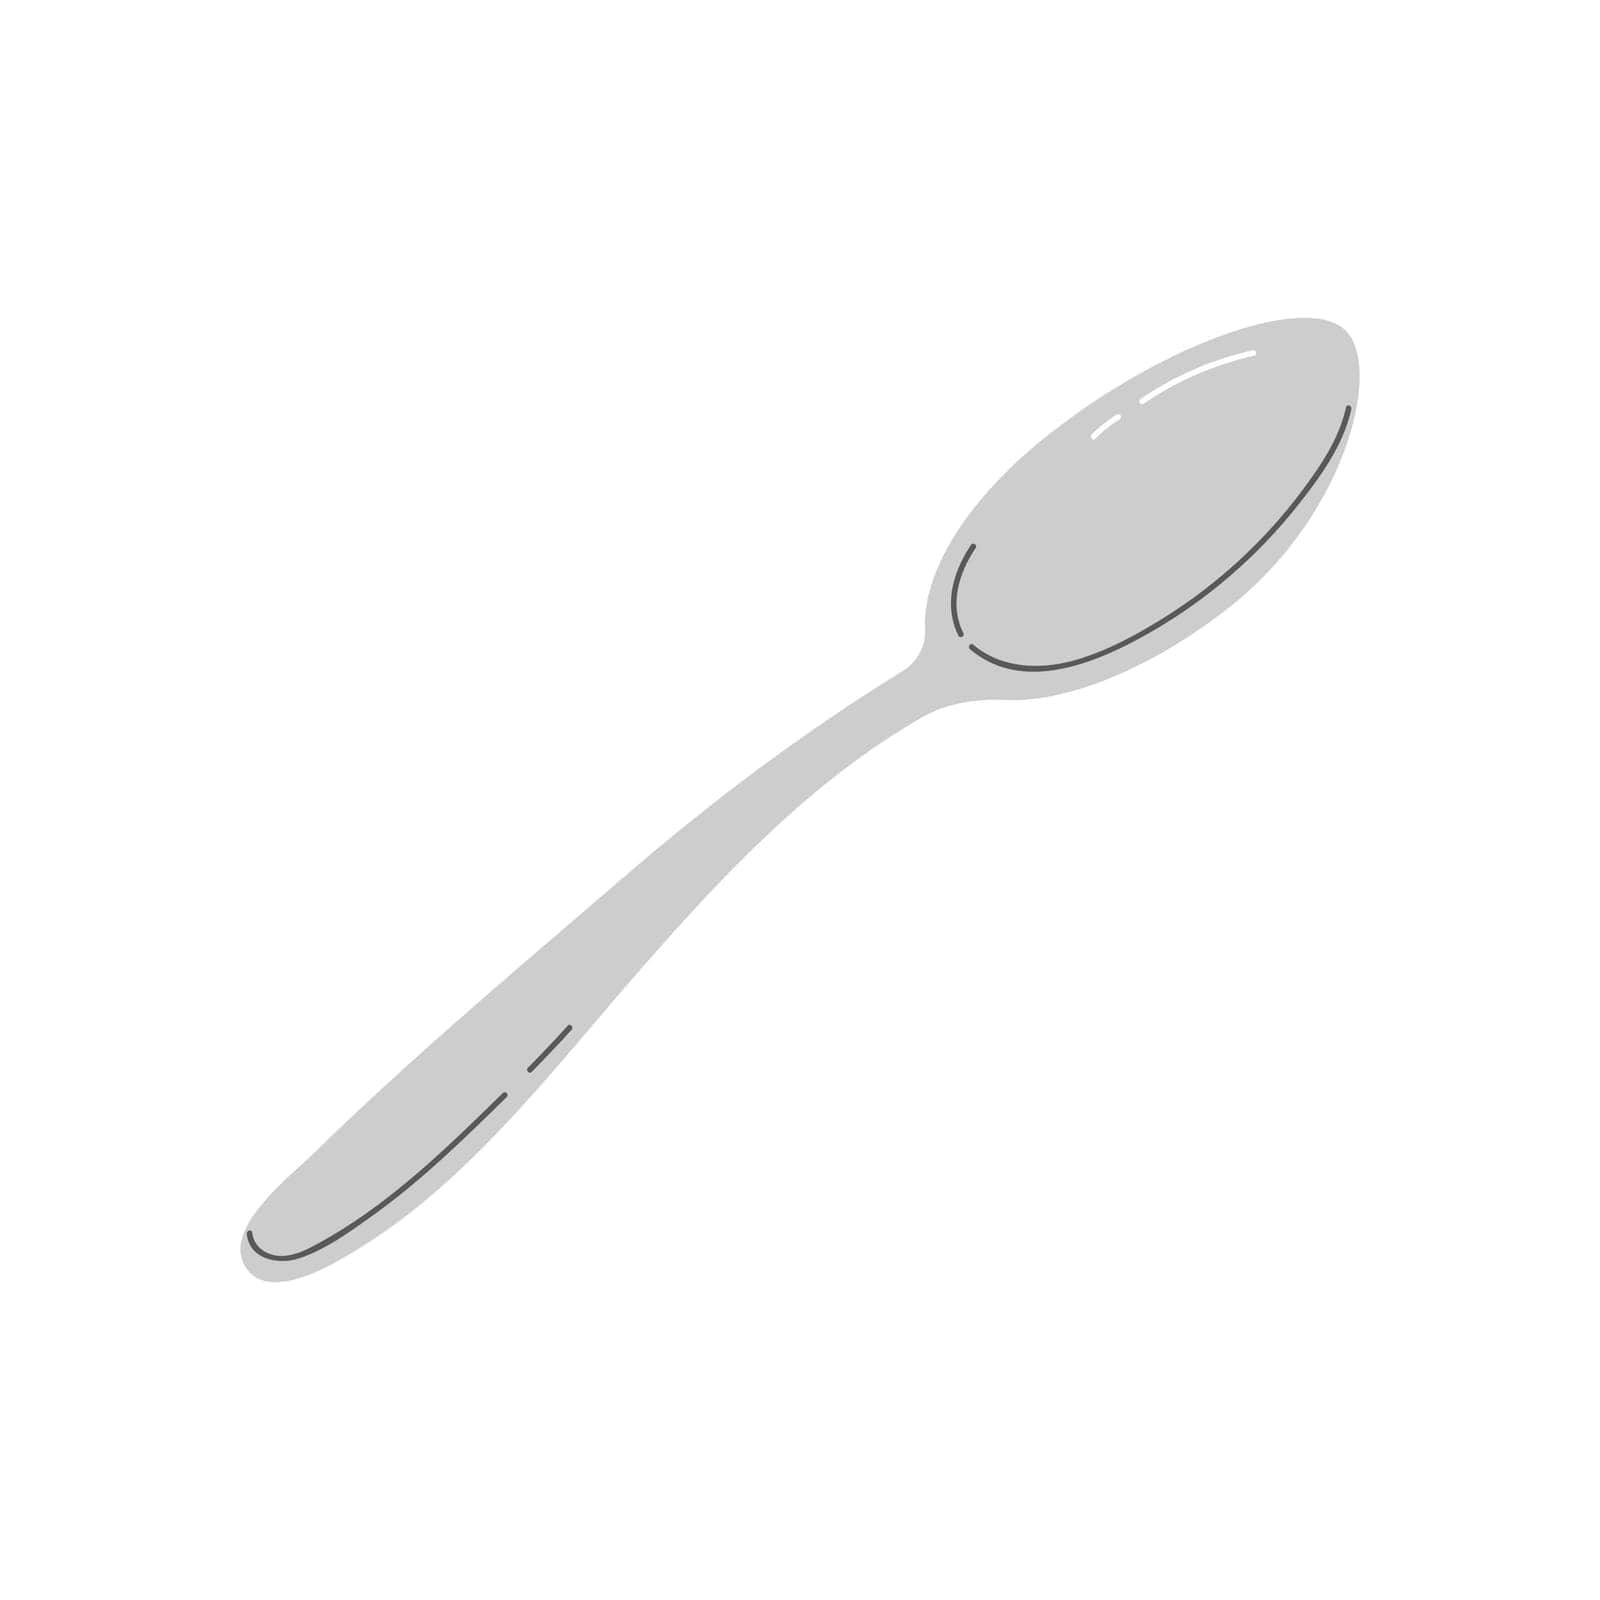 Metal or silver spoon, top view of teaspoon, utensil for food serving by iconicprototype